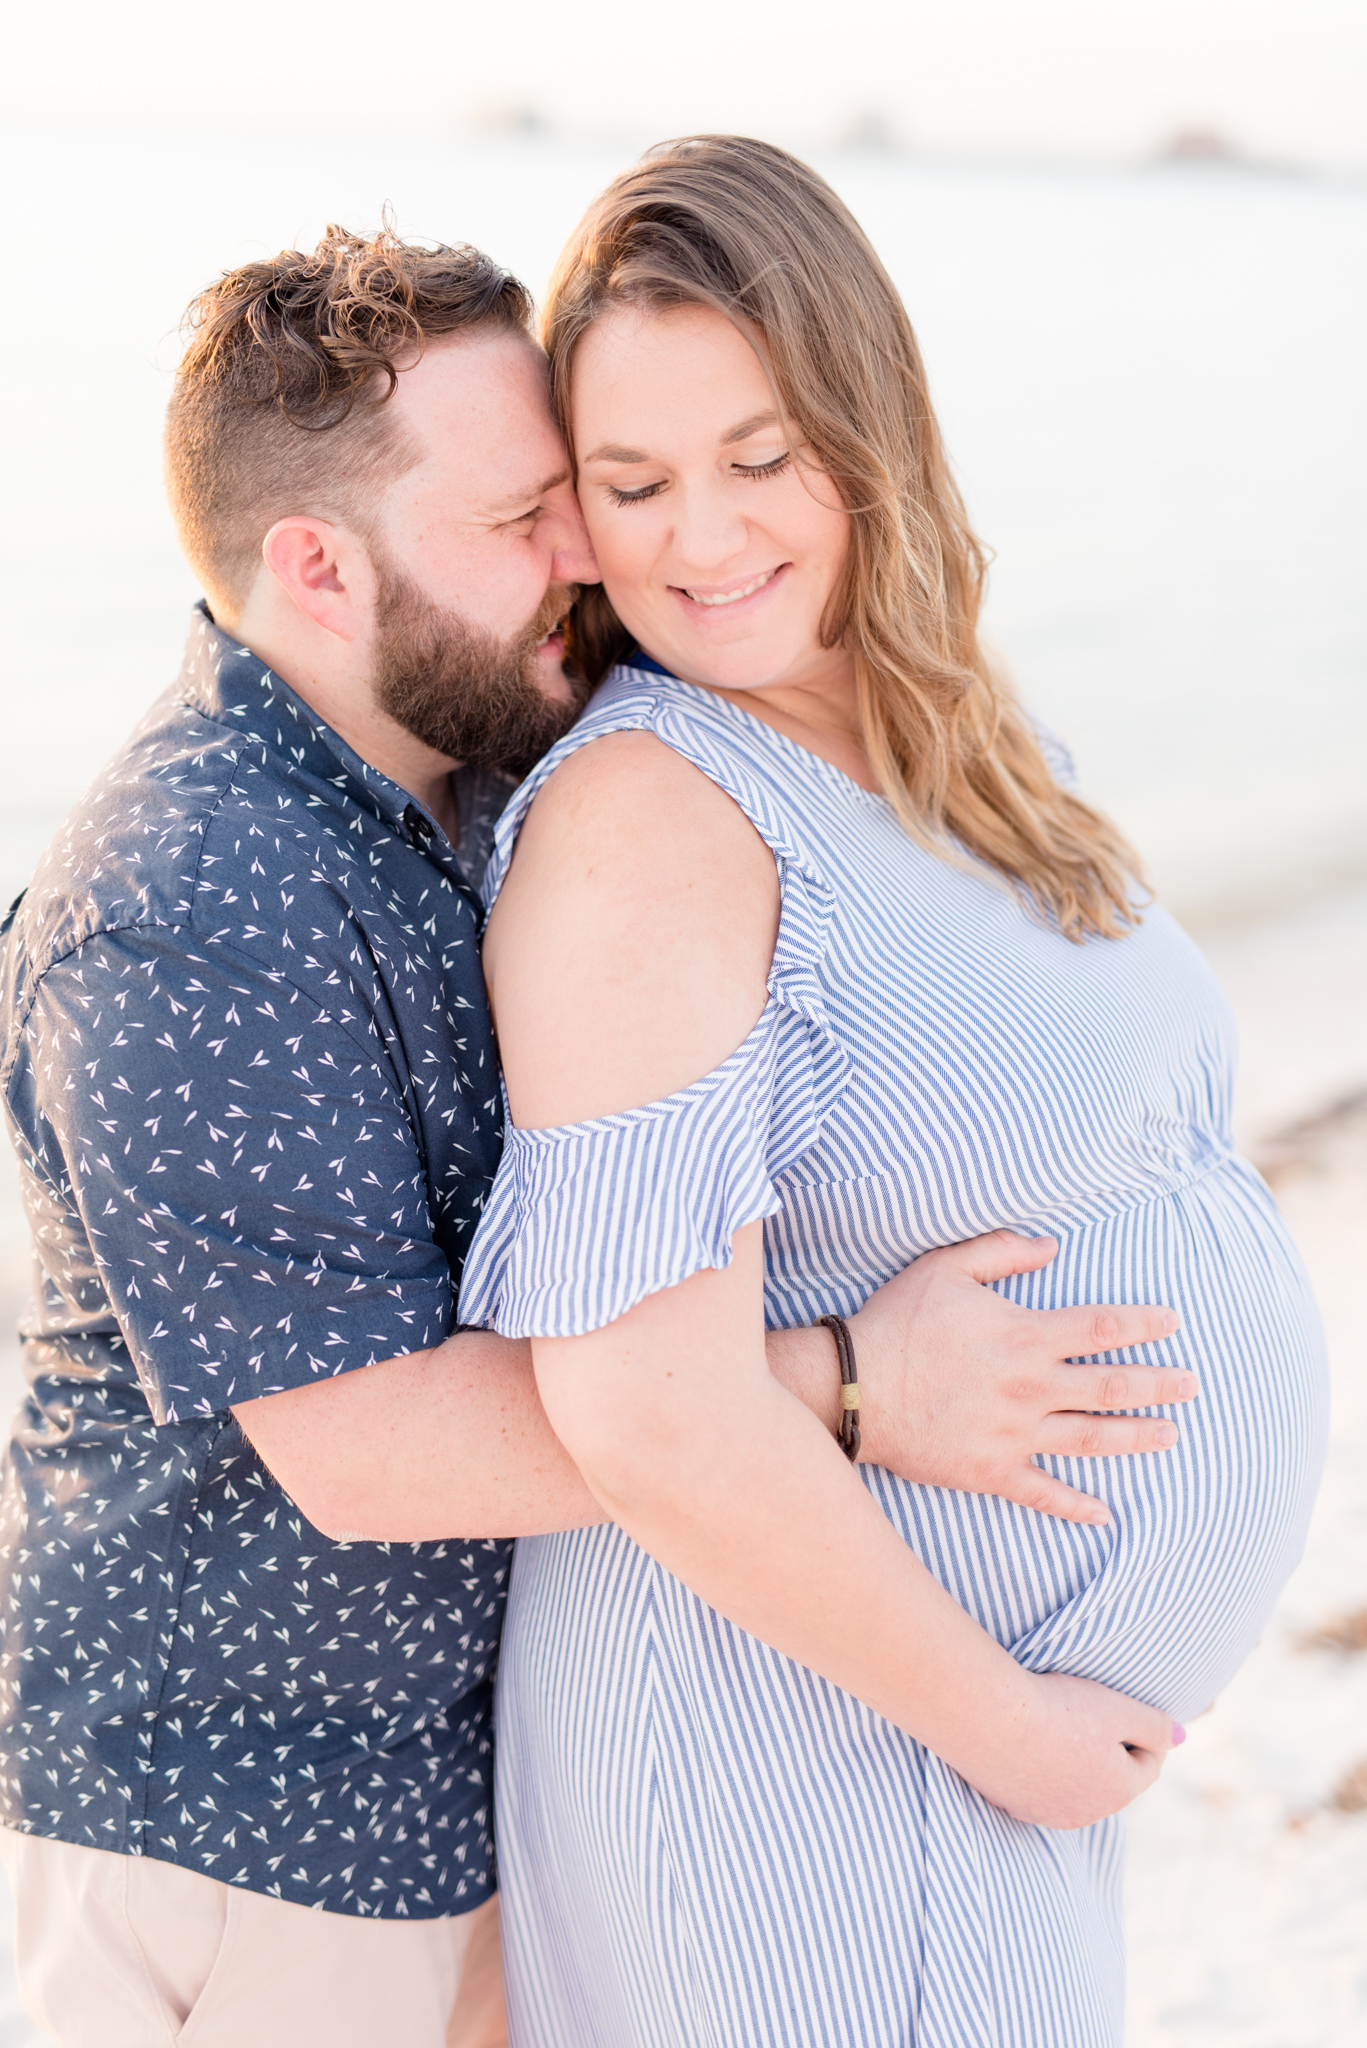 Tampa couple smiles during maternity session.